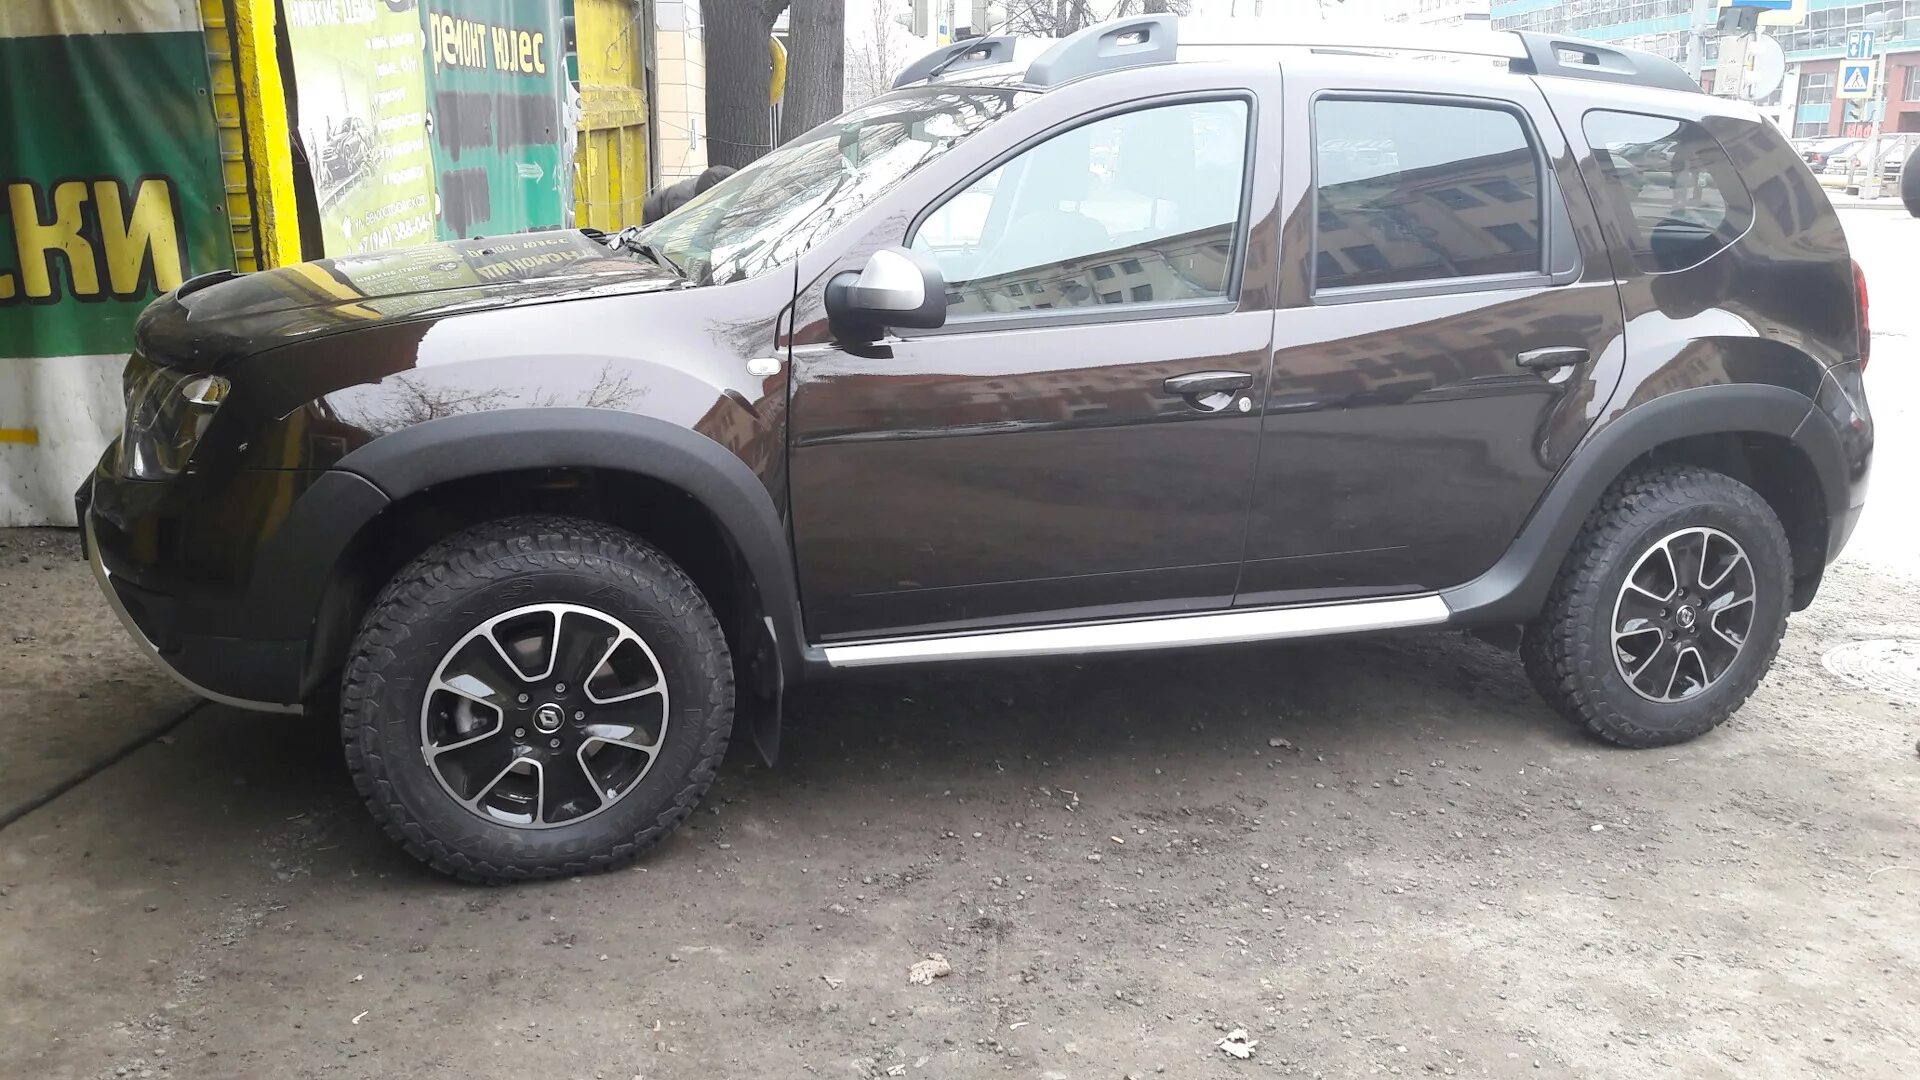 Renault Duster 215 70 r16. 215/70 R16 на Рено Дастер. Дастер 225 70 16 МТ. Шины Рено Дастер 215 70 16.